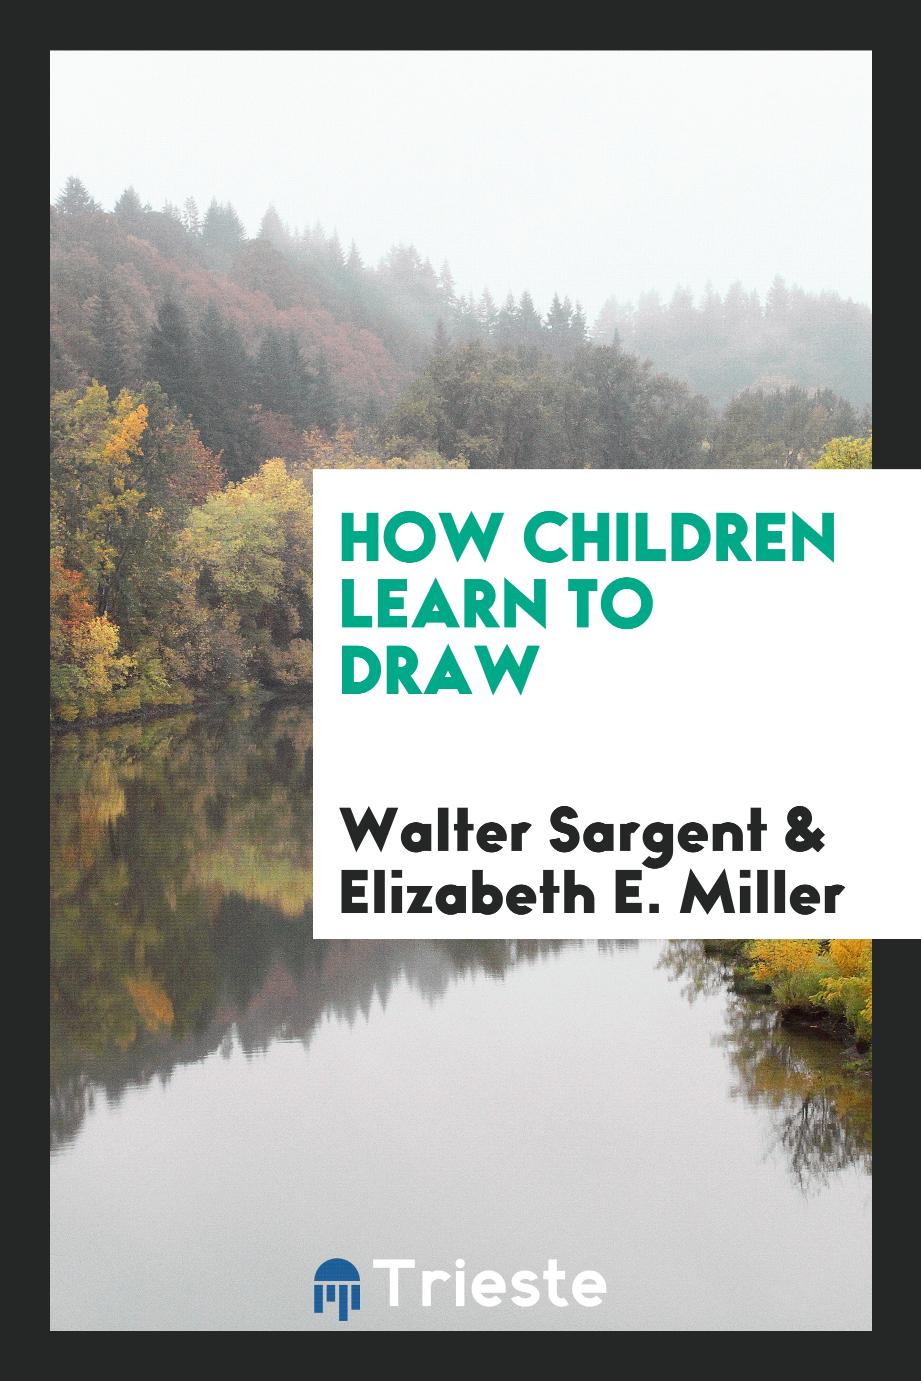 How children learn to draw